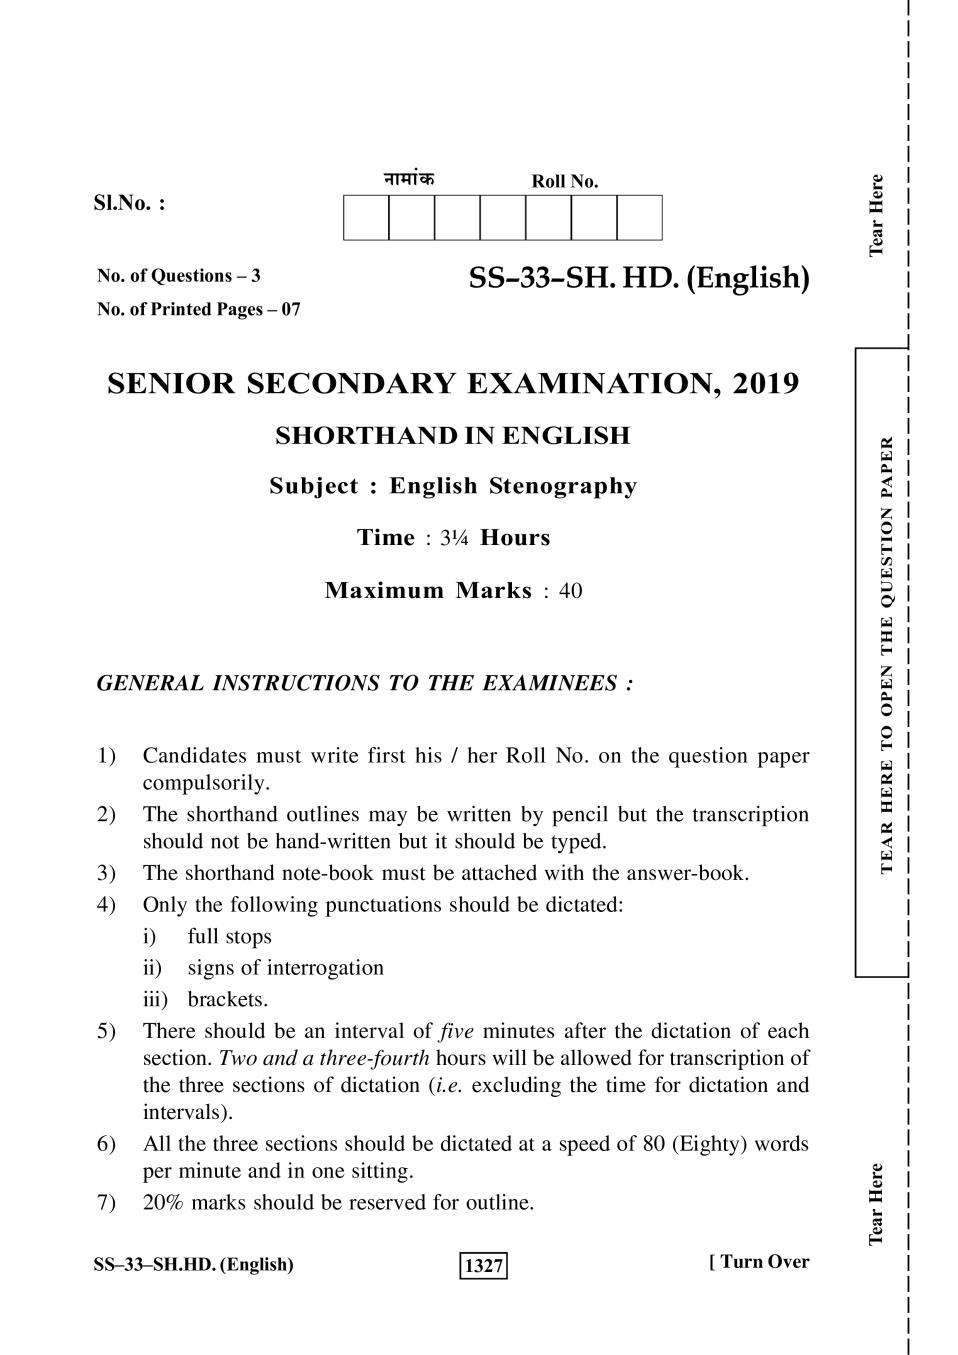 Rajasthan Board 12th Class Shorthand English Question Paper 2019 - Page 1